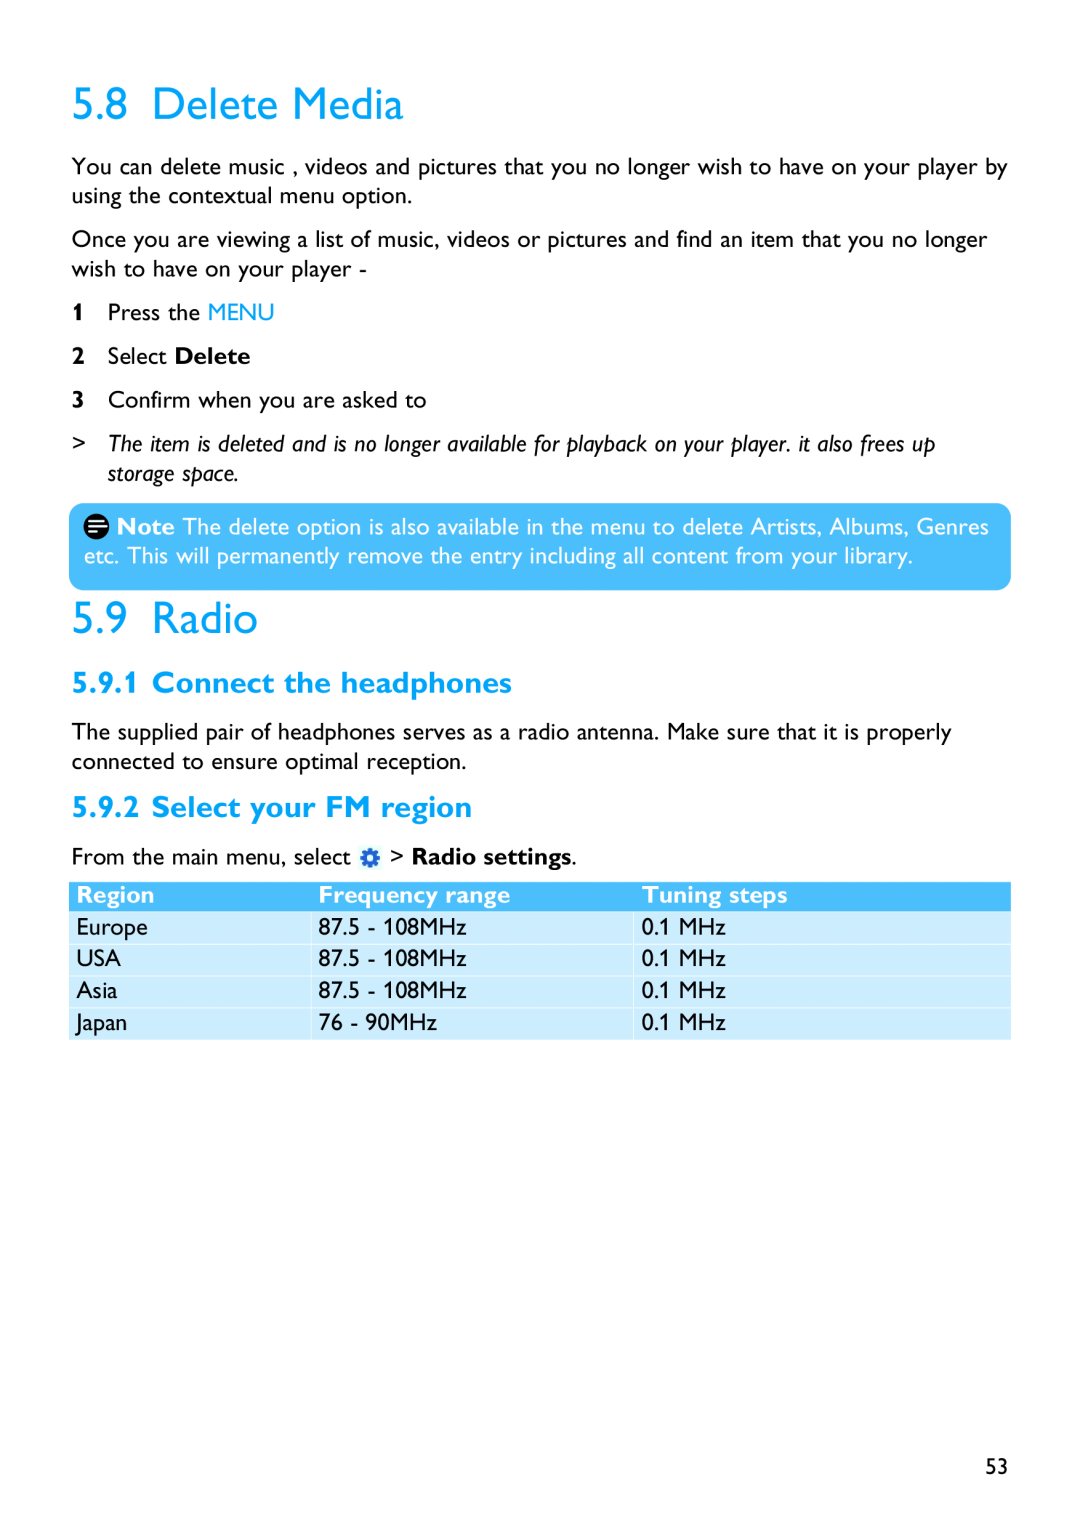 Philips SA5144 Delete Media, Radio, Connect the headphones, Select your FM region, Region, Frequency range, Tuning steps 